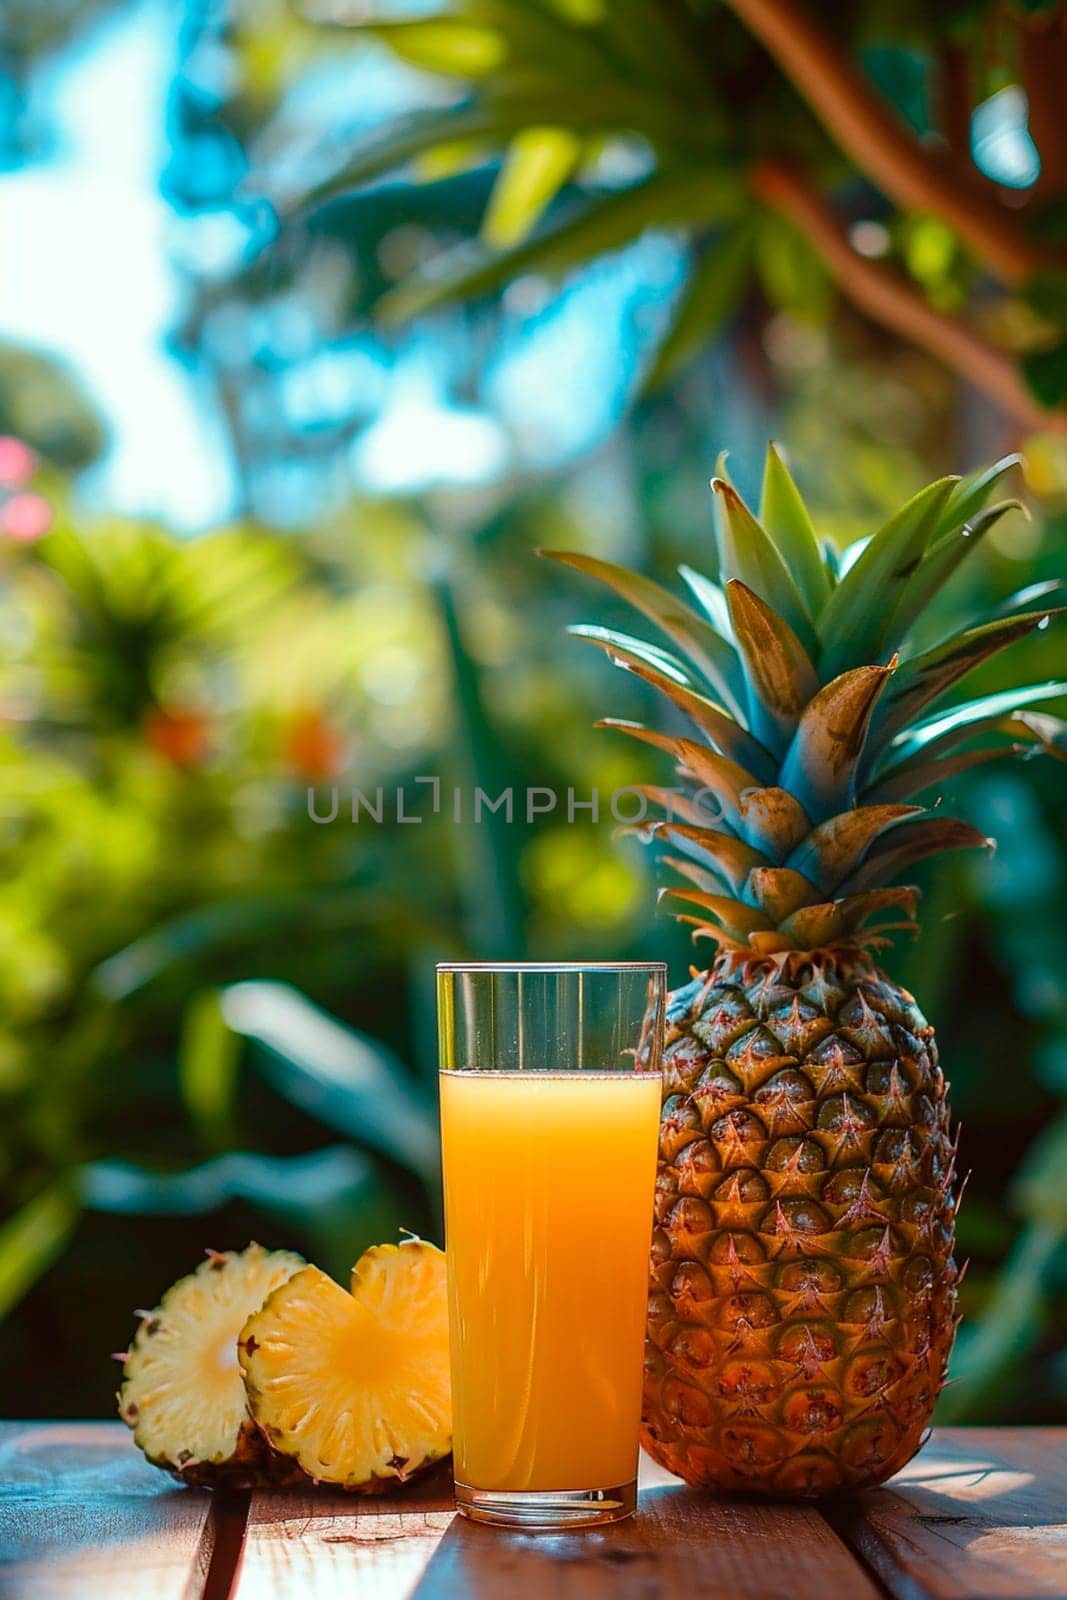 pineapple juice in a glass. Selective focus. nature.